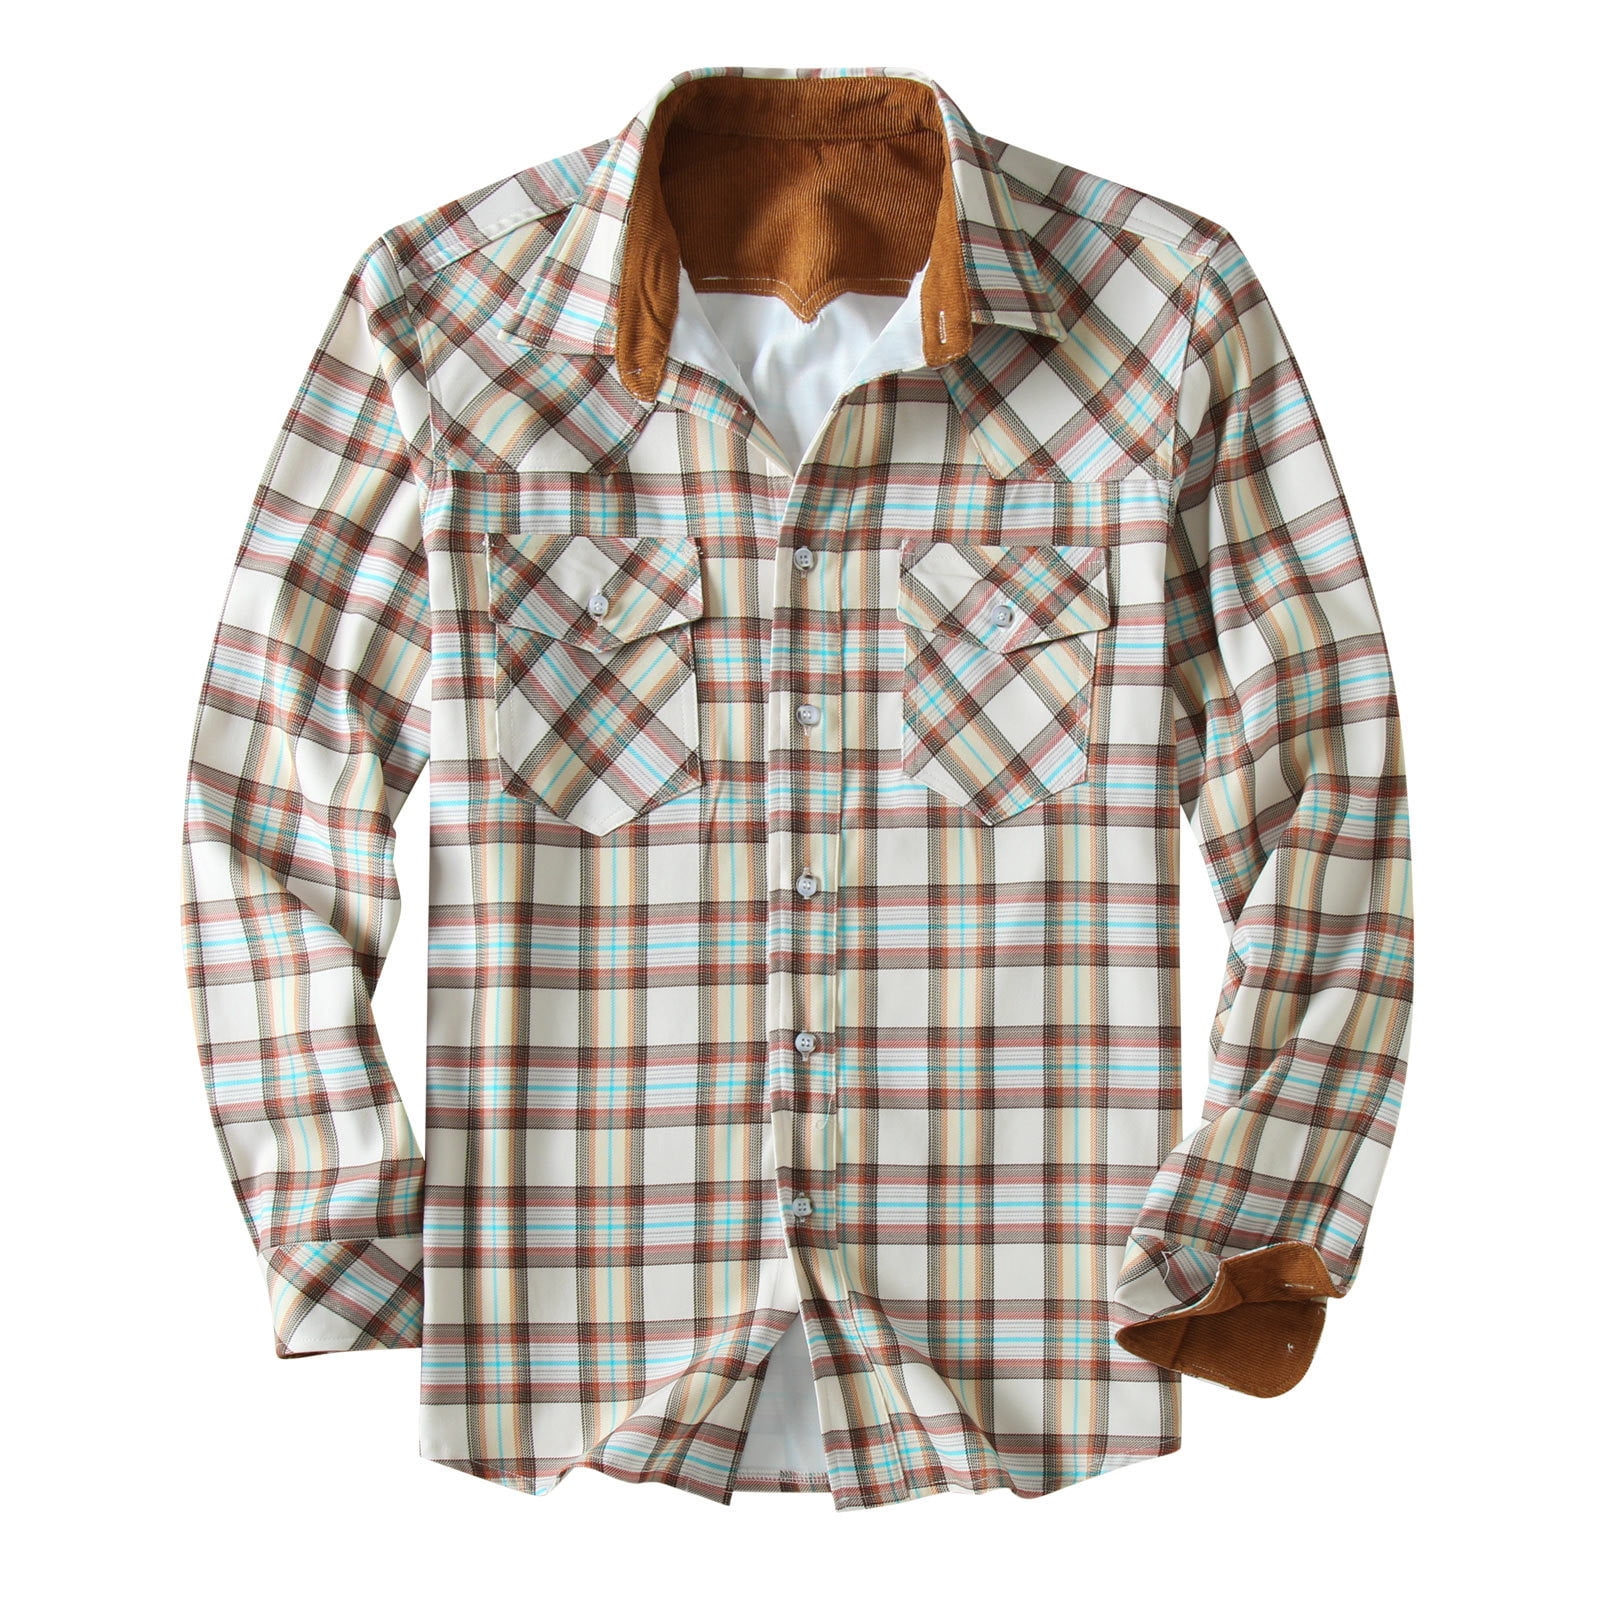 YYDGH Flannel Shirt for Men Long Sleeve Casual Button-Down Regular Fit  Plaid Shirts Casual Slim Fit Warm Lapel Jackets Khaki XXL 